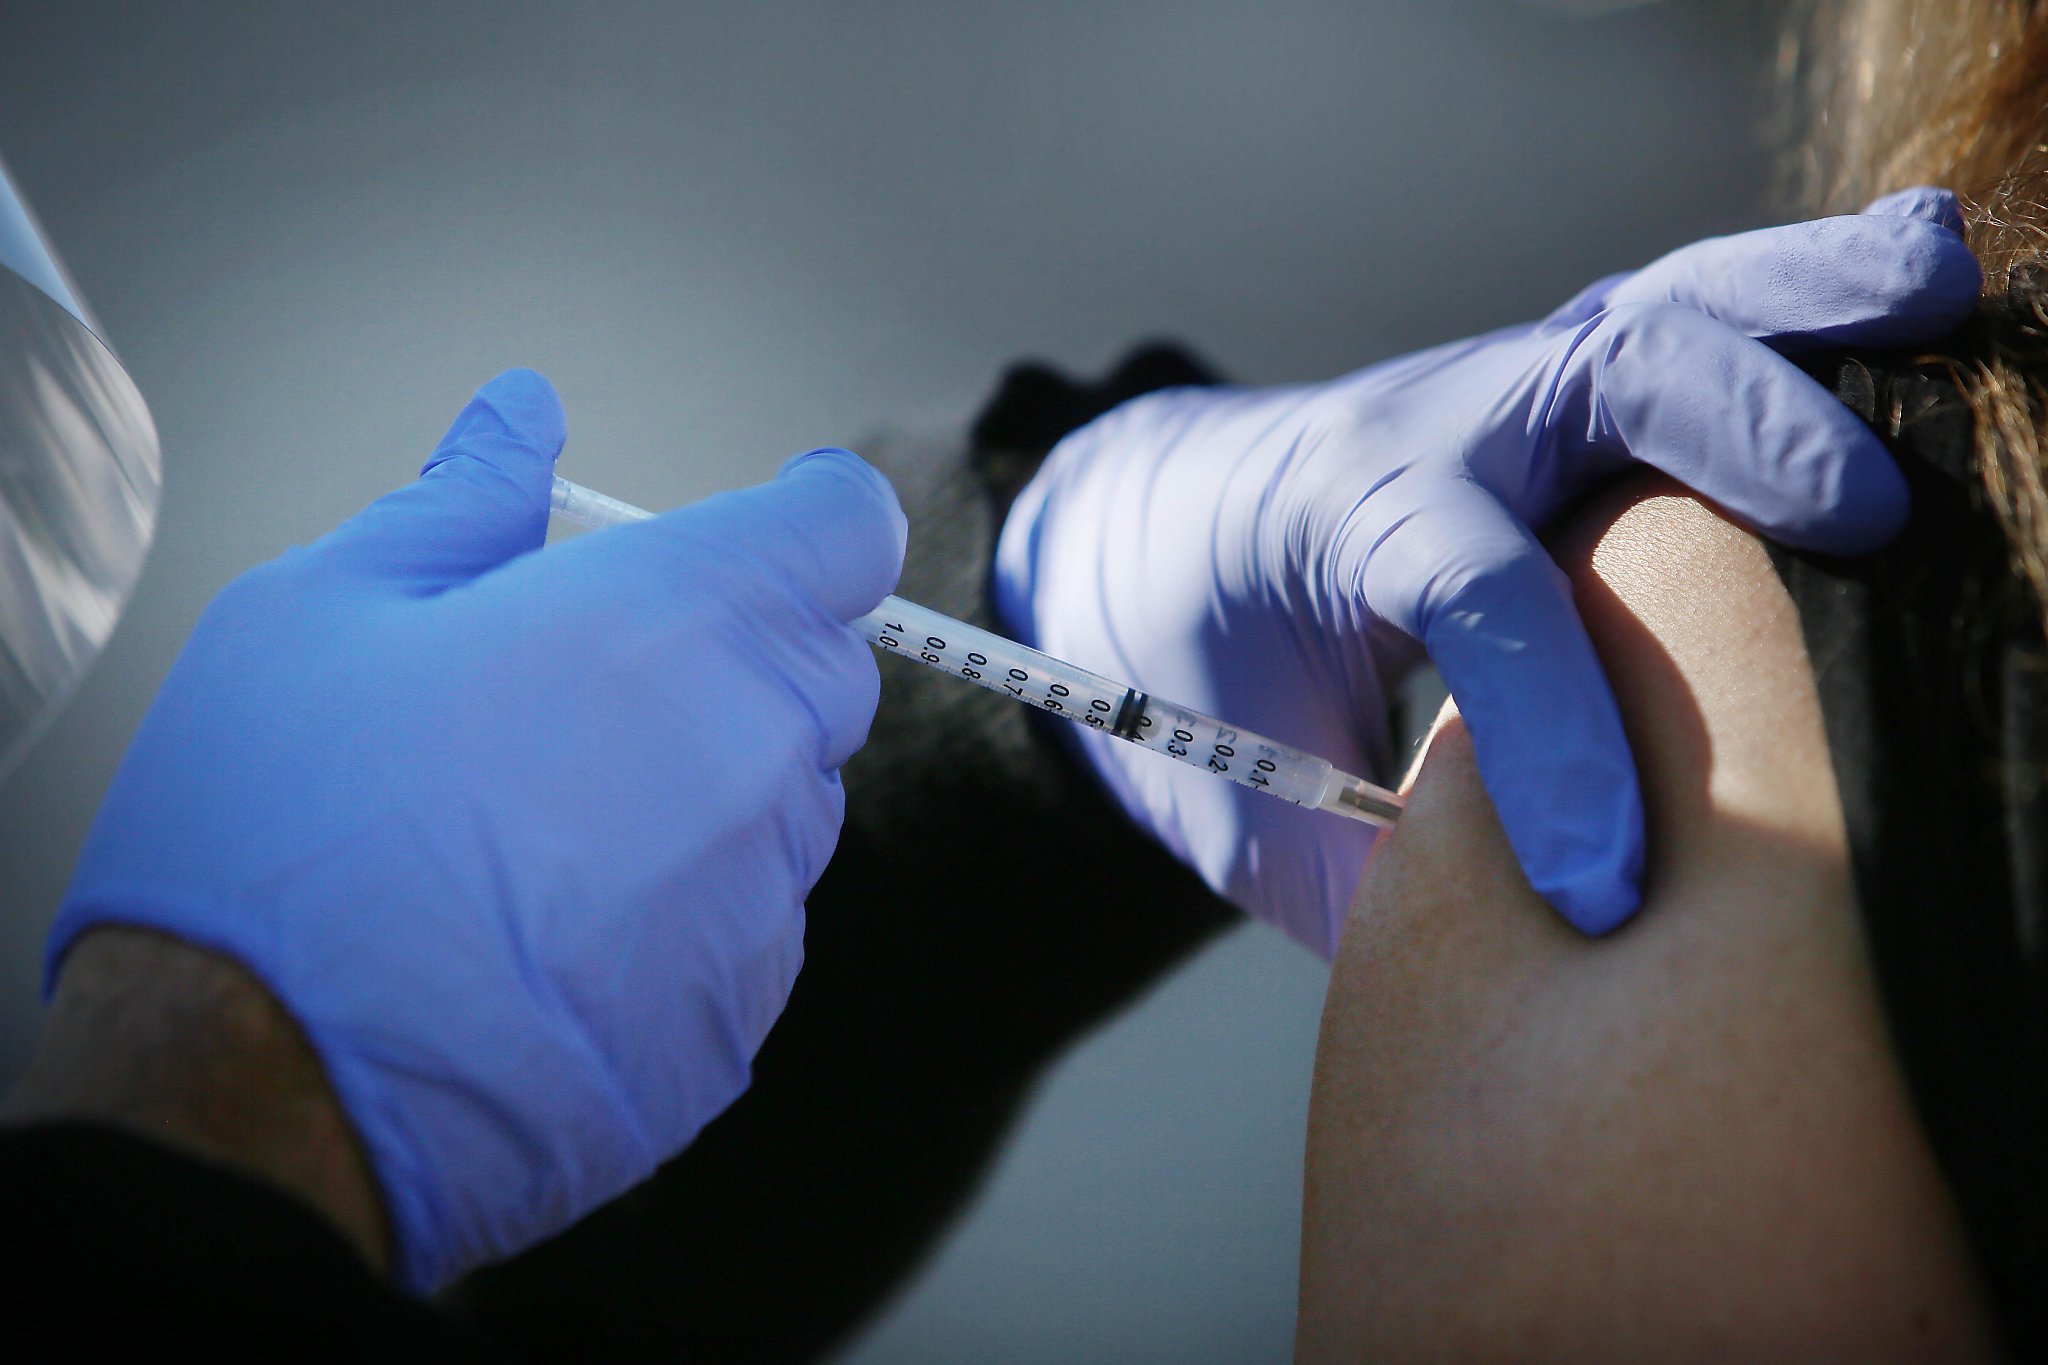 How to know if your BMI qualifies you for a vaccine in San Francisco now